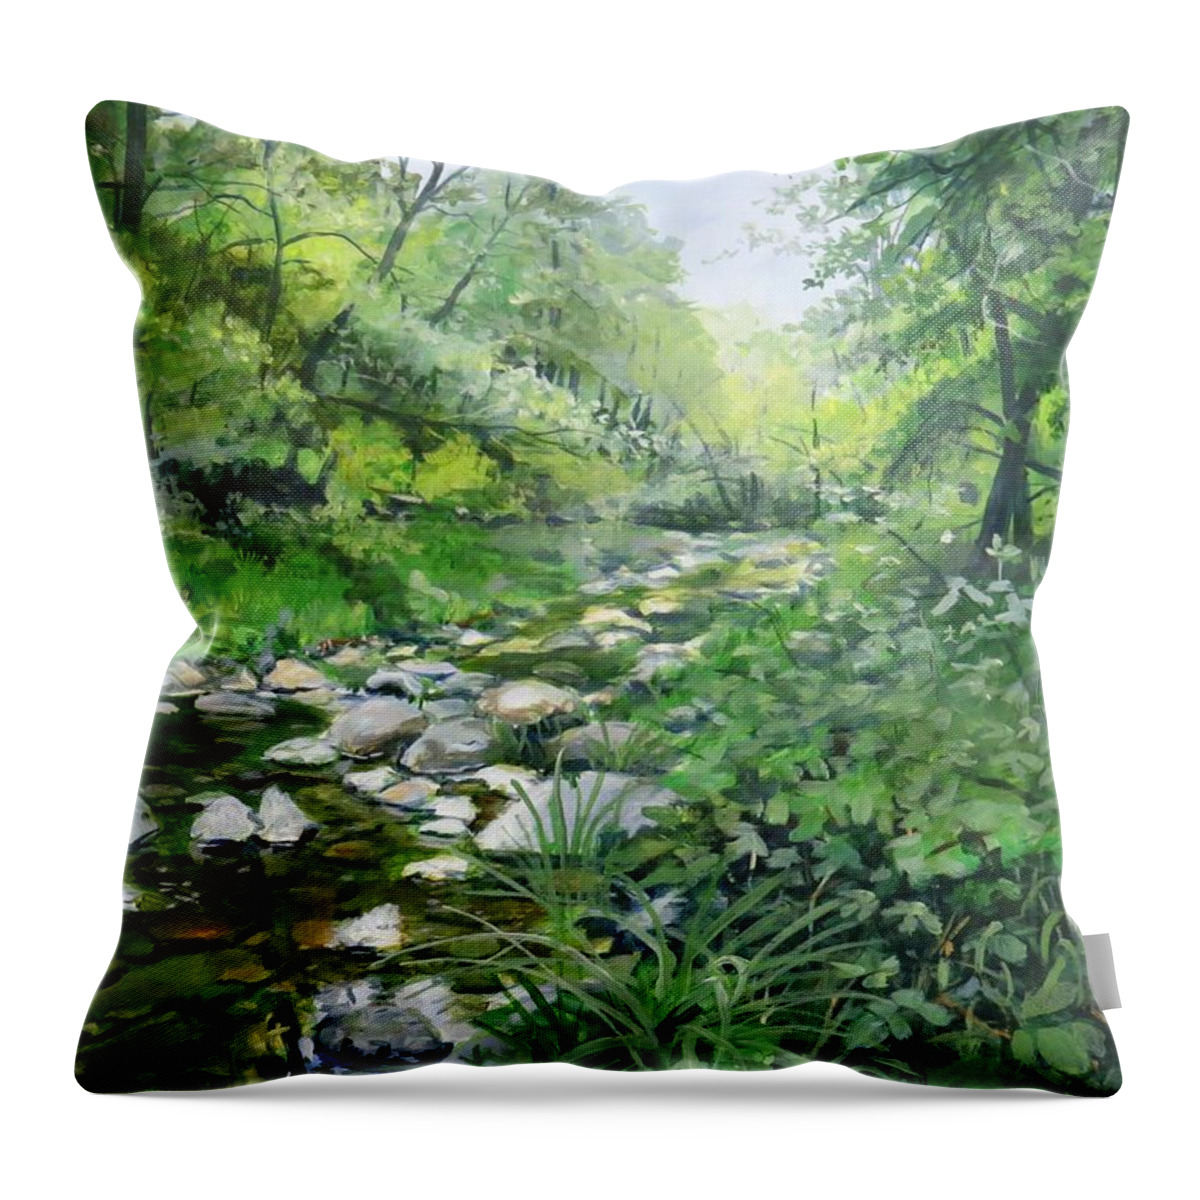 Stream Throw Pillow featuring the painting Another Look by William Brody